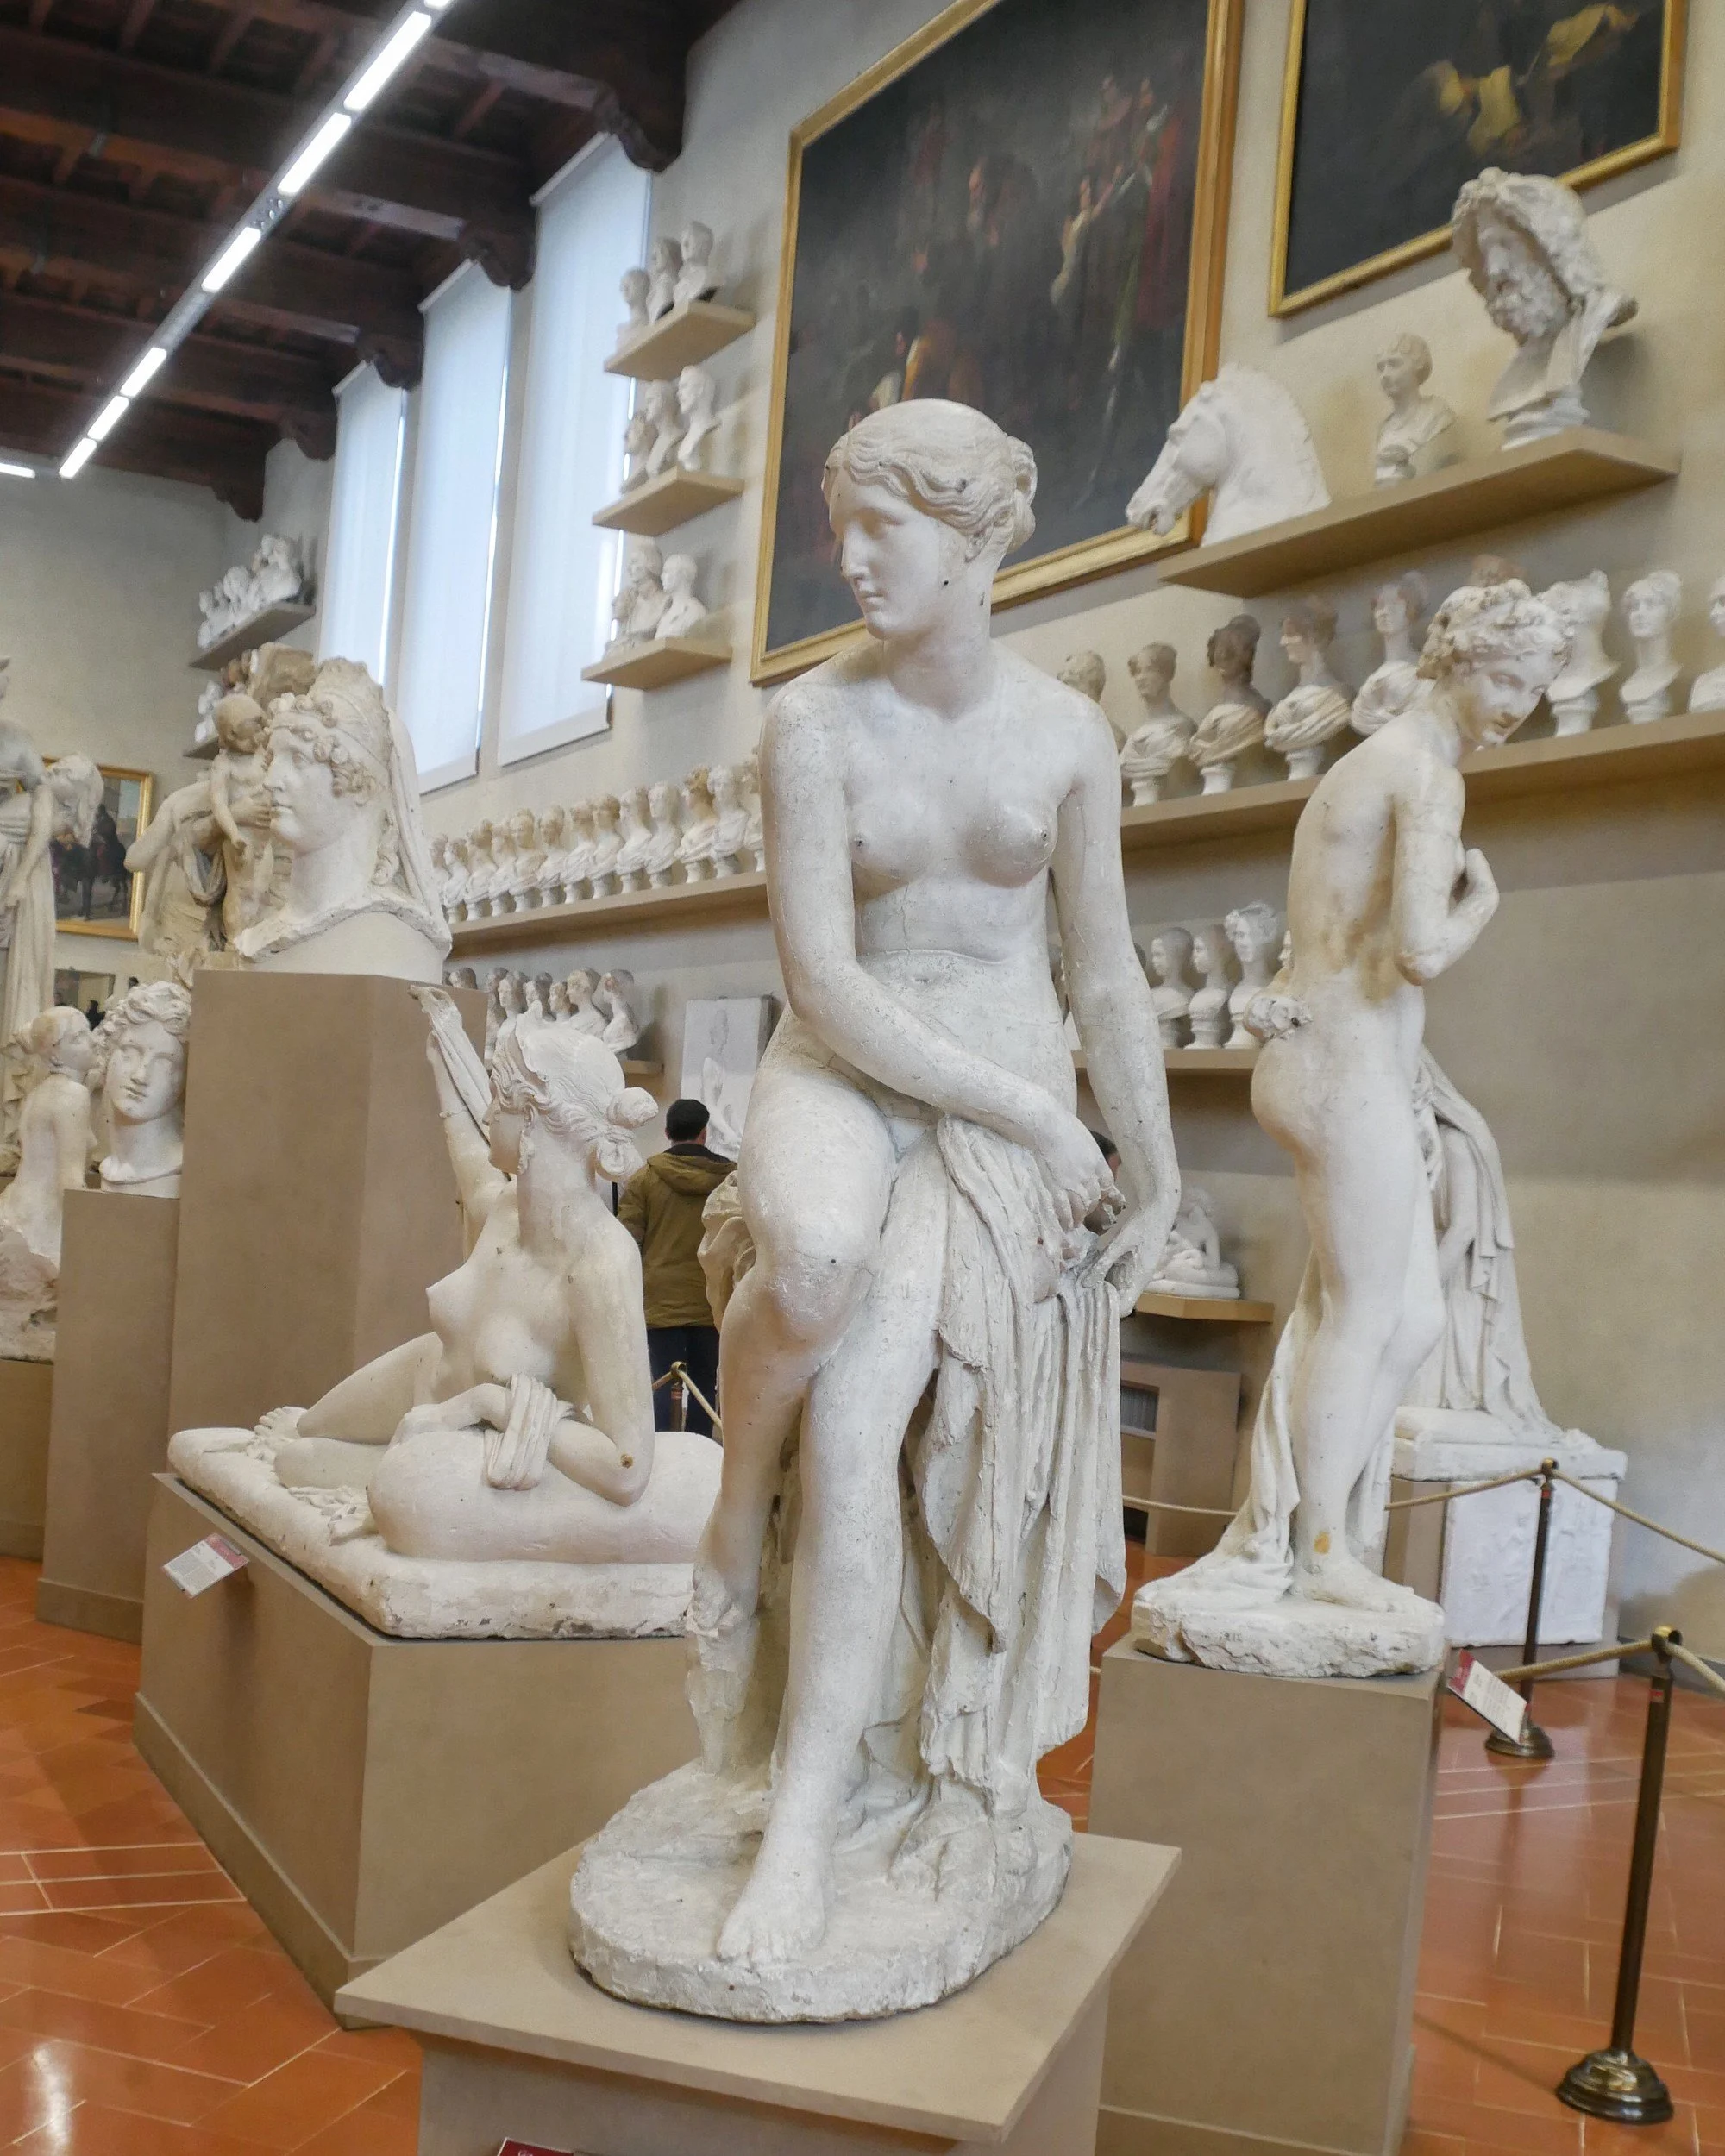 Galleria dell’Accademia in Florence, Italy 